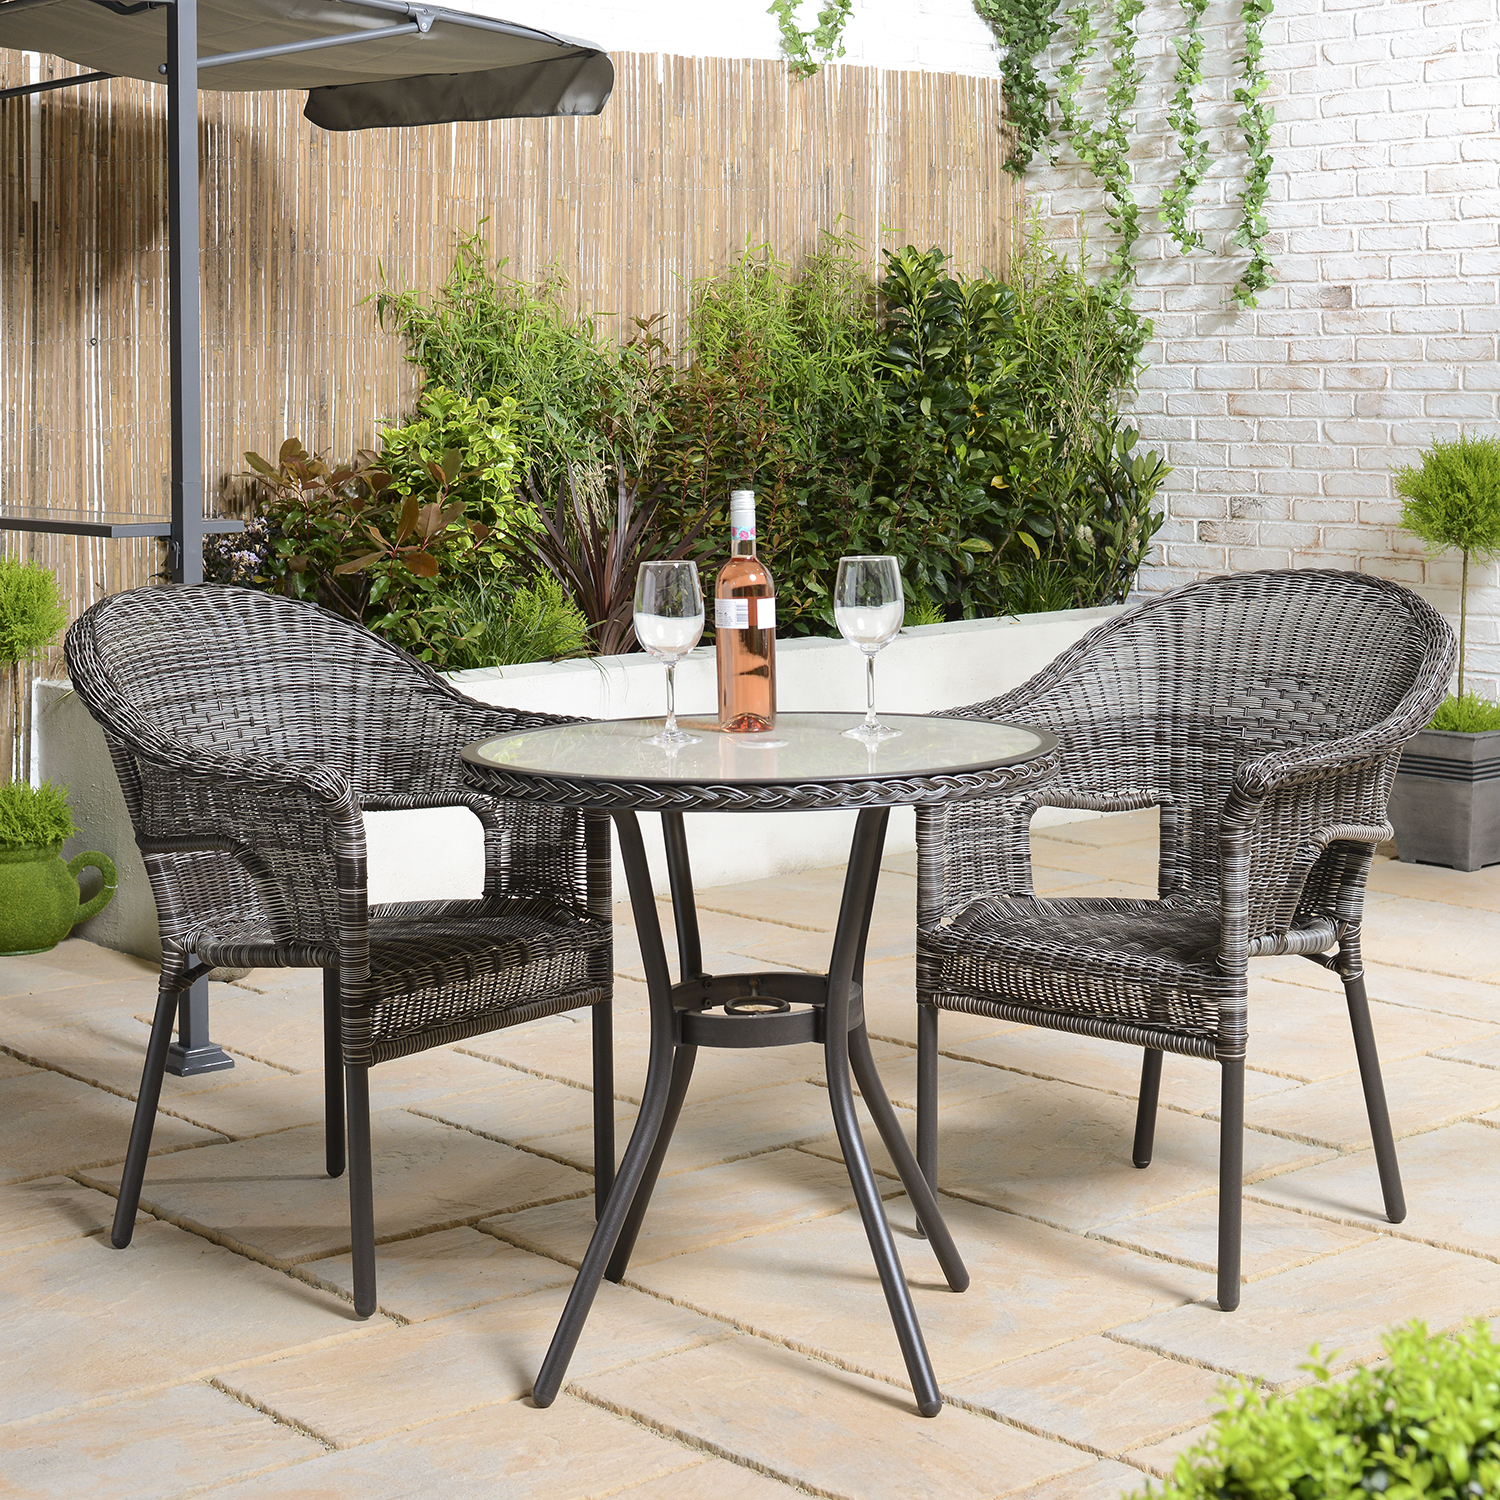 Malay Deluxe Outdoor Essentials Padstow Wicker Chair Image 1